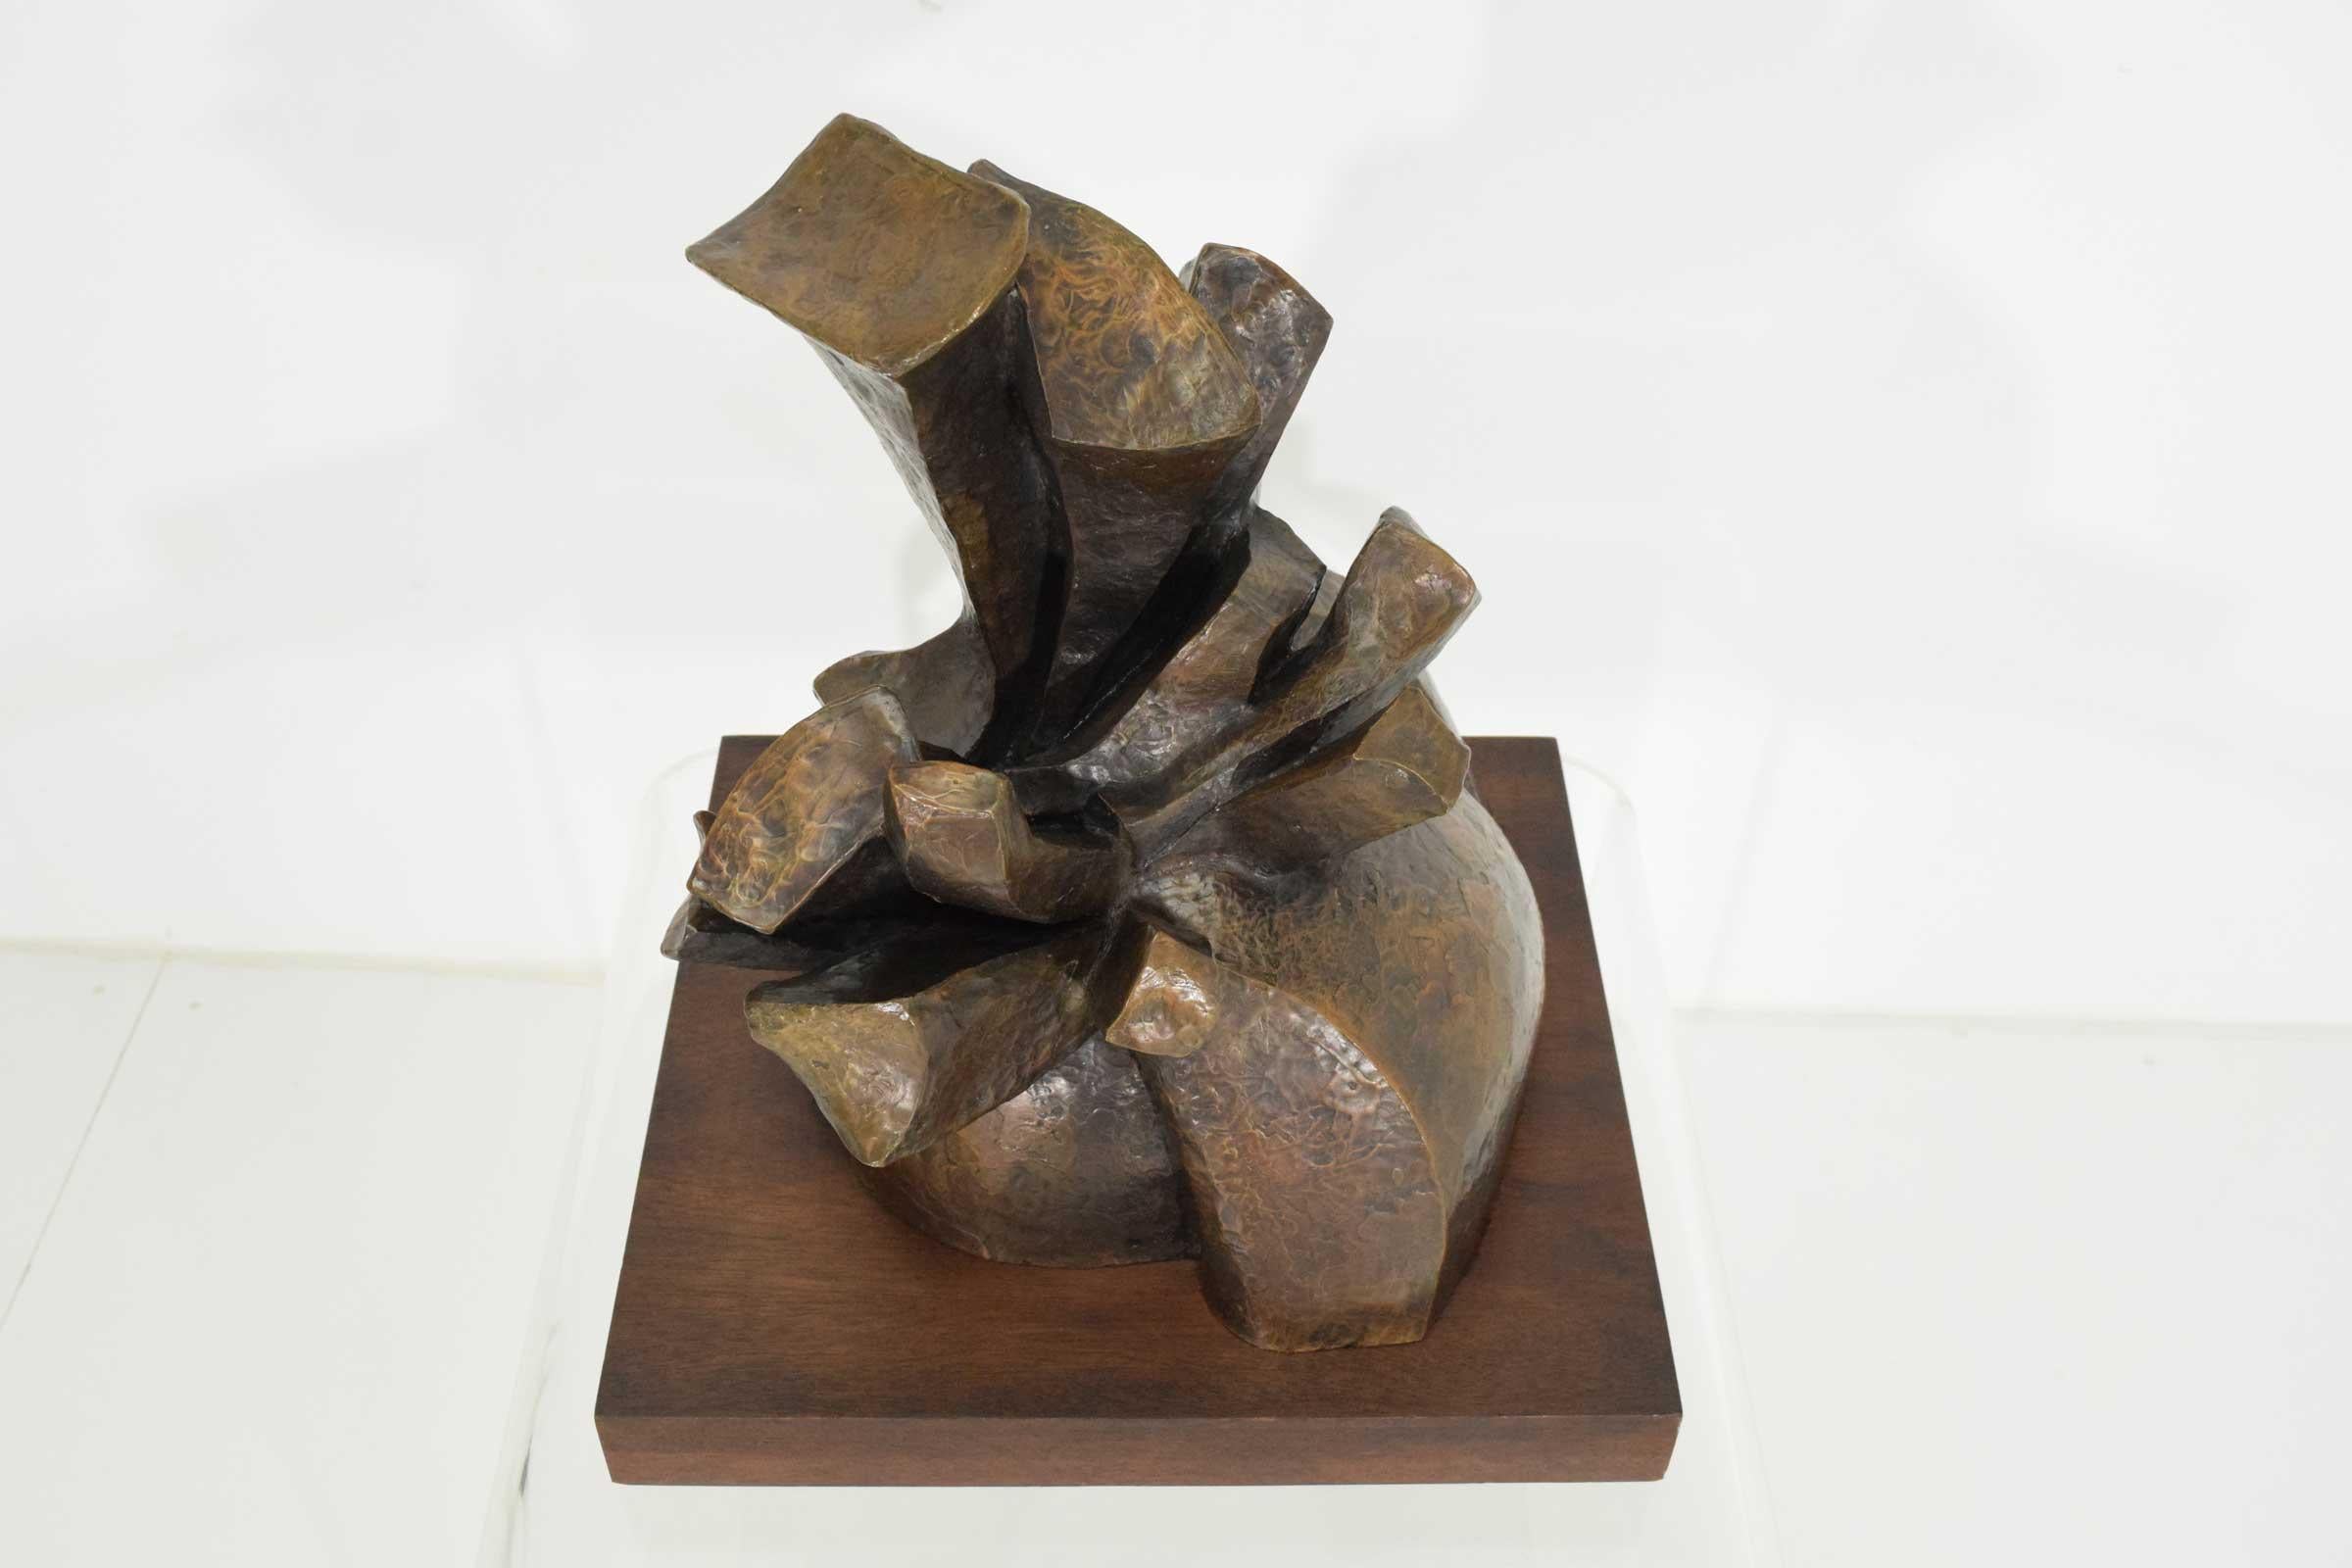 Signed V. Schudalk, dated 1975. Large organic shaped bronze sculpture. Weighs about 80 lbs.